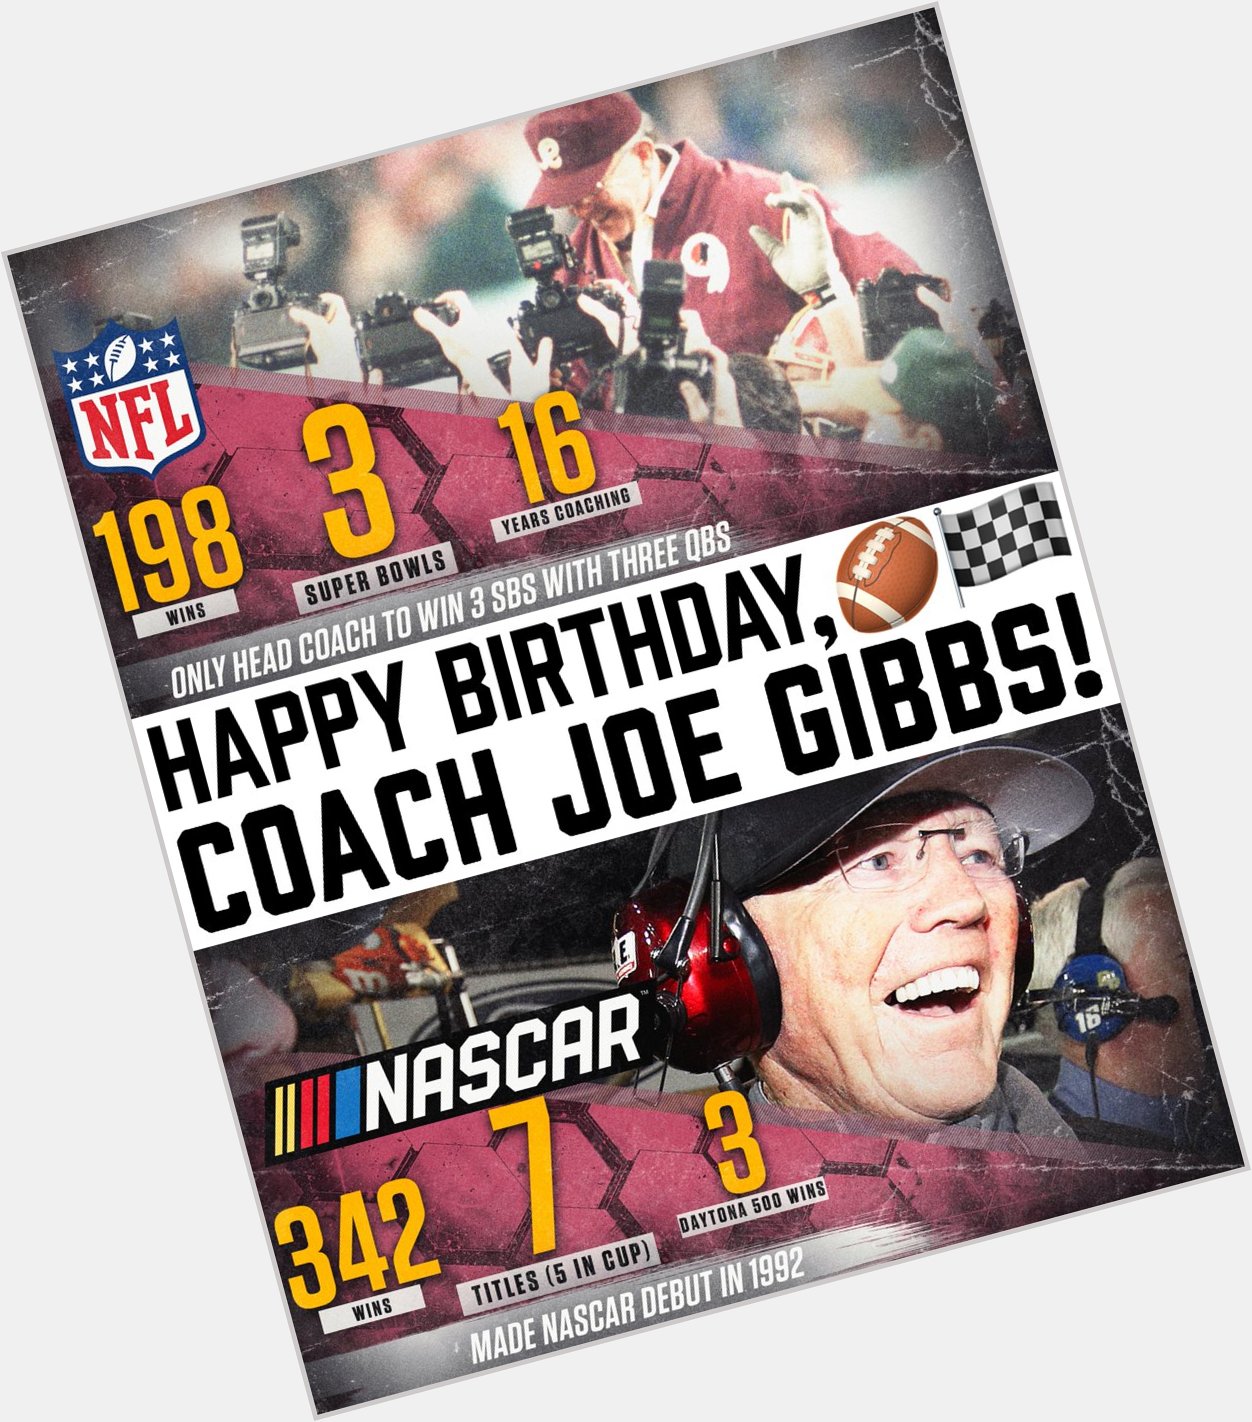 A legend in the and turned 79 today!

Help us wish Joe Gibbs a very happy birthday!  